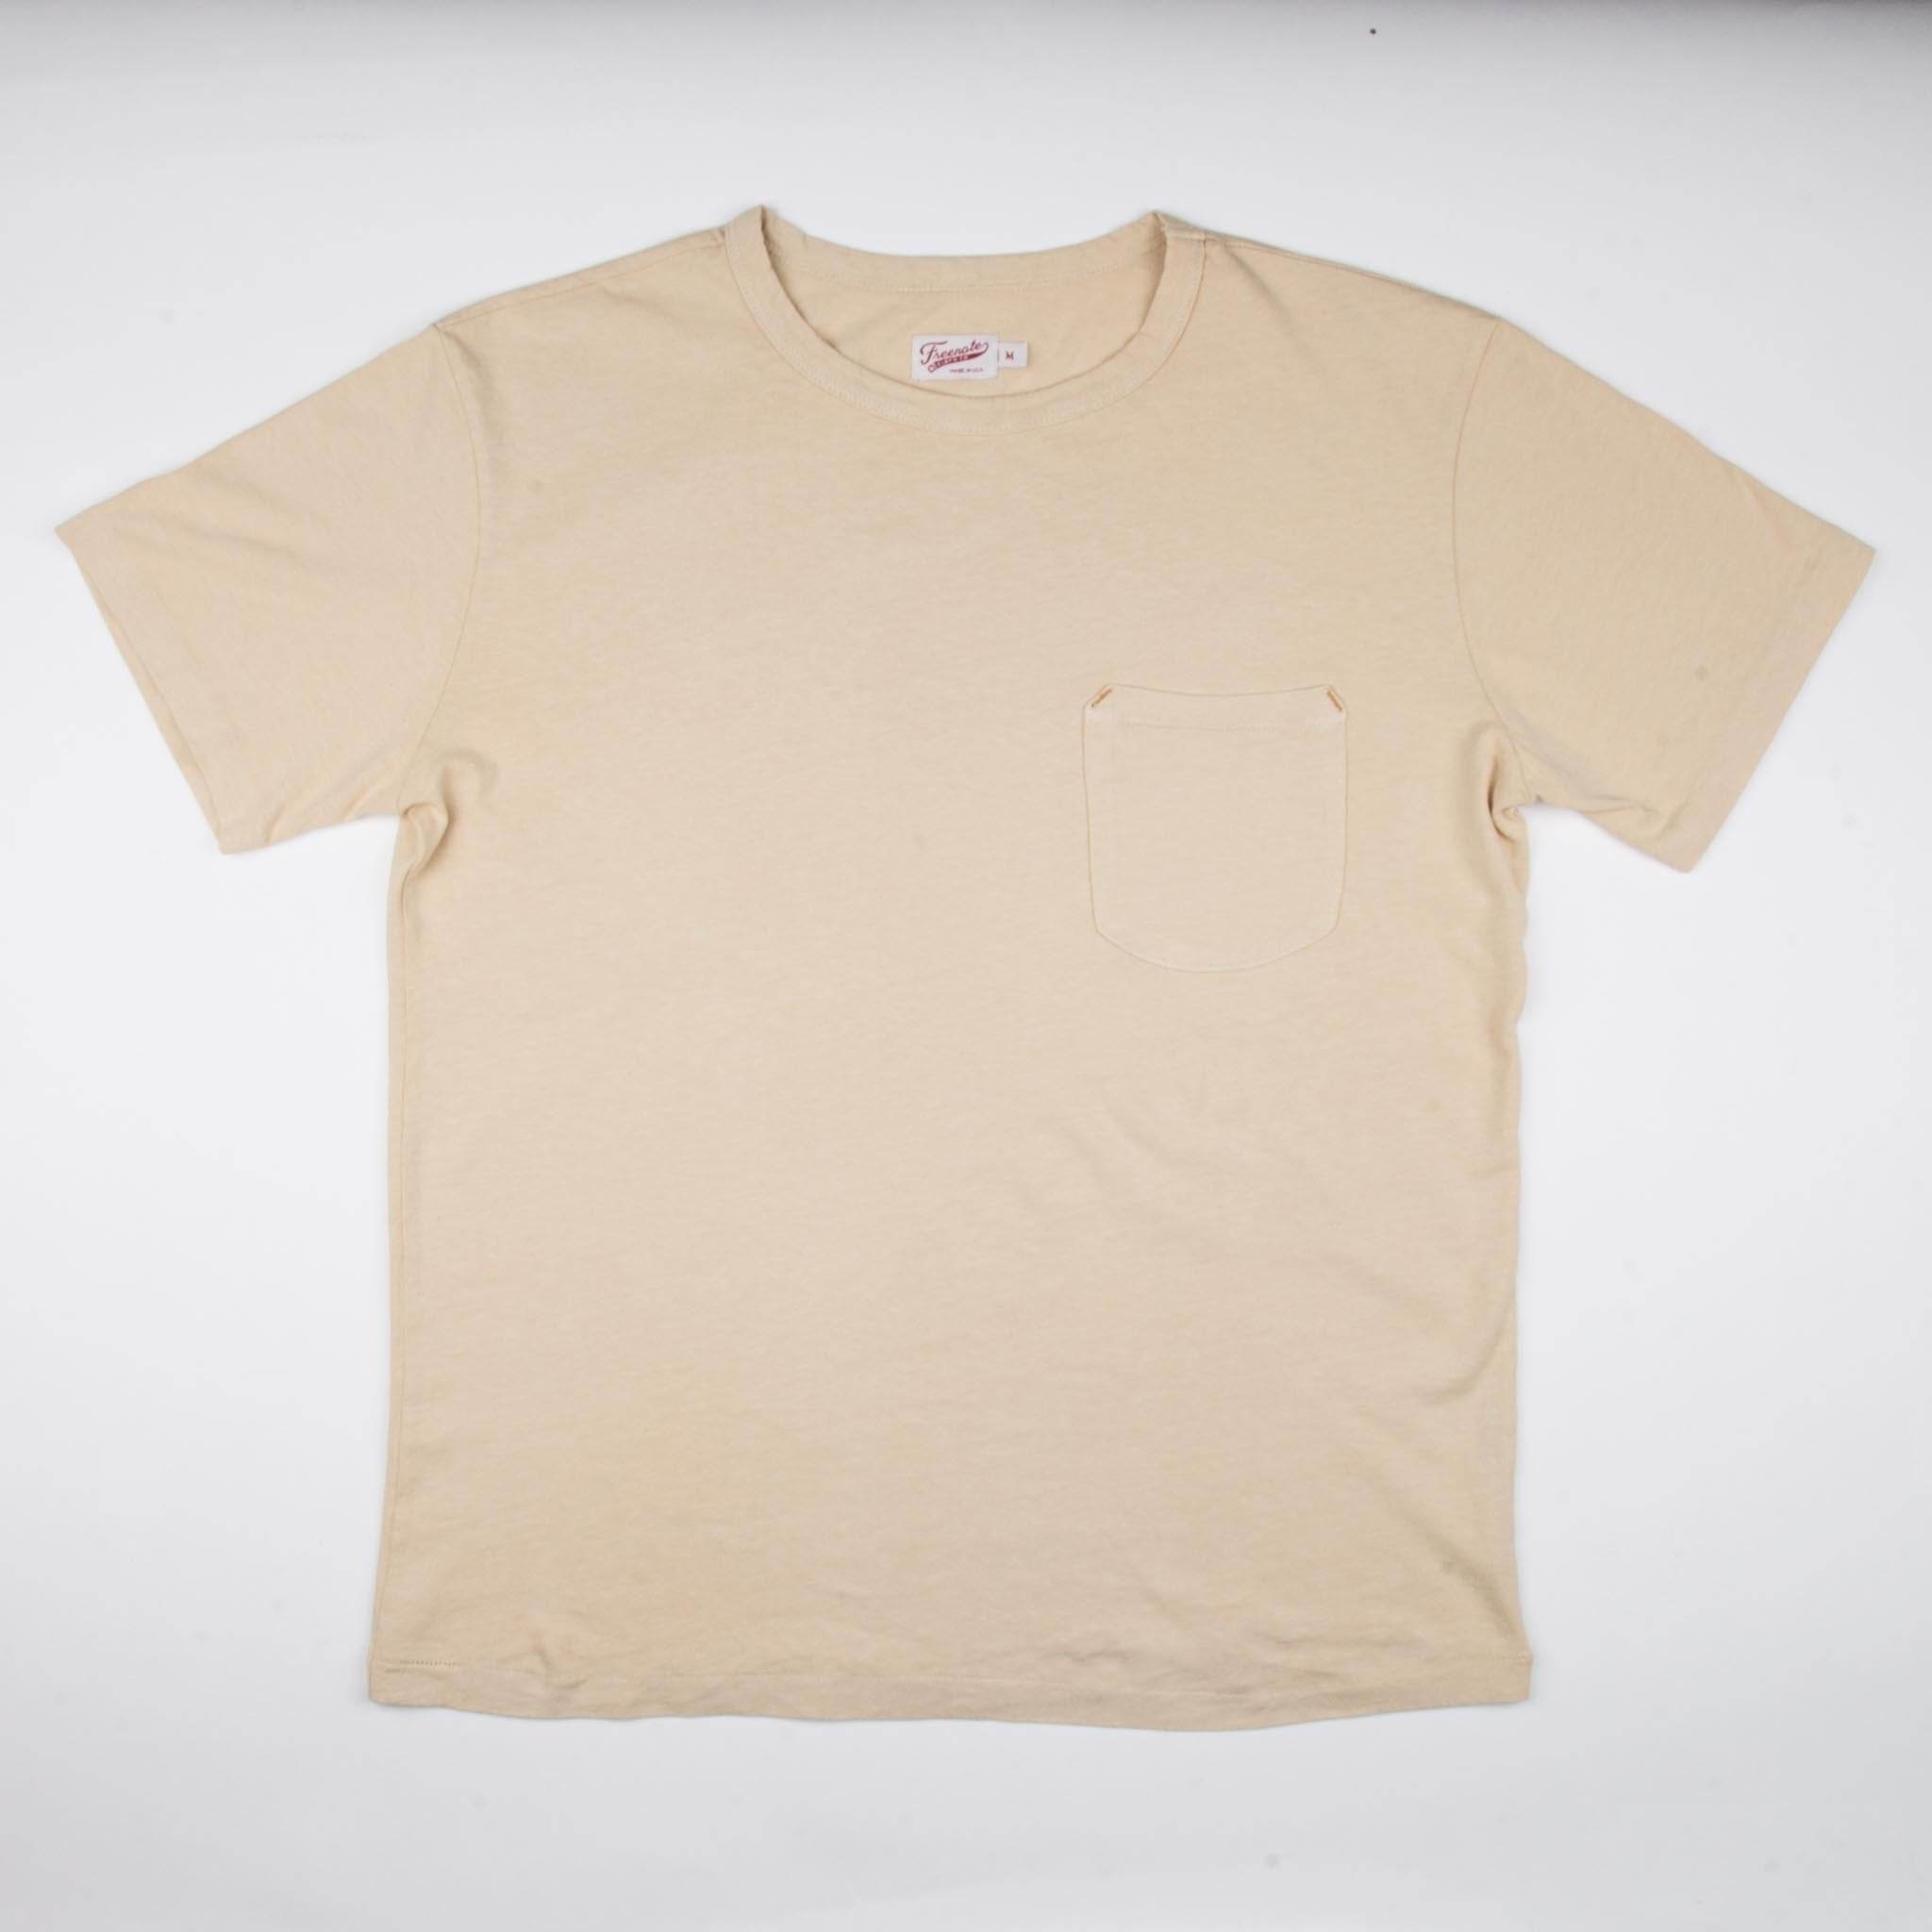 Supreme Blank T Shirt With Custom Graphic White Tag Made In USA Size Large